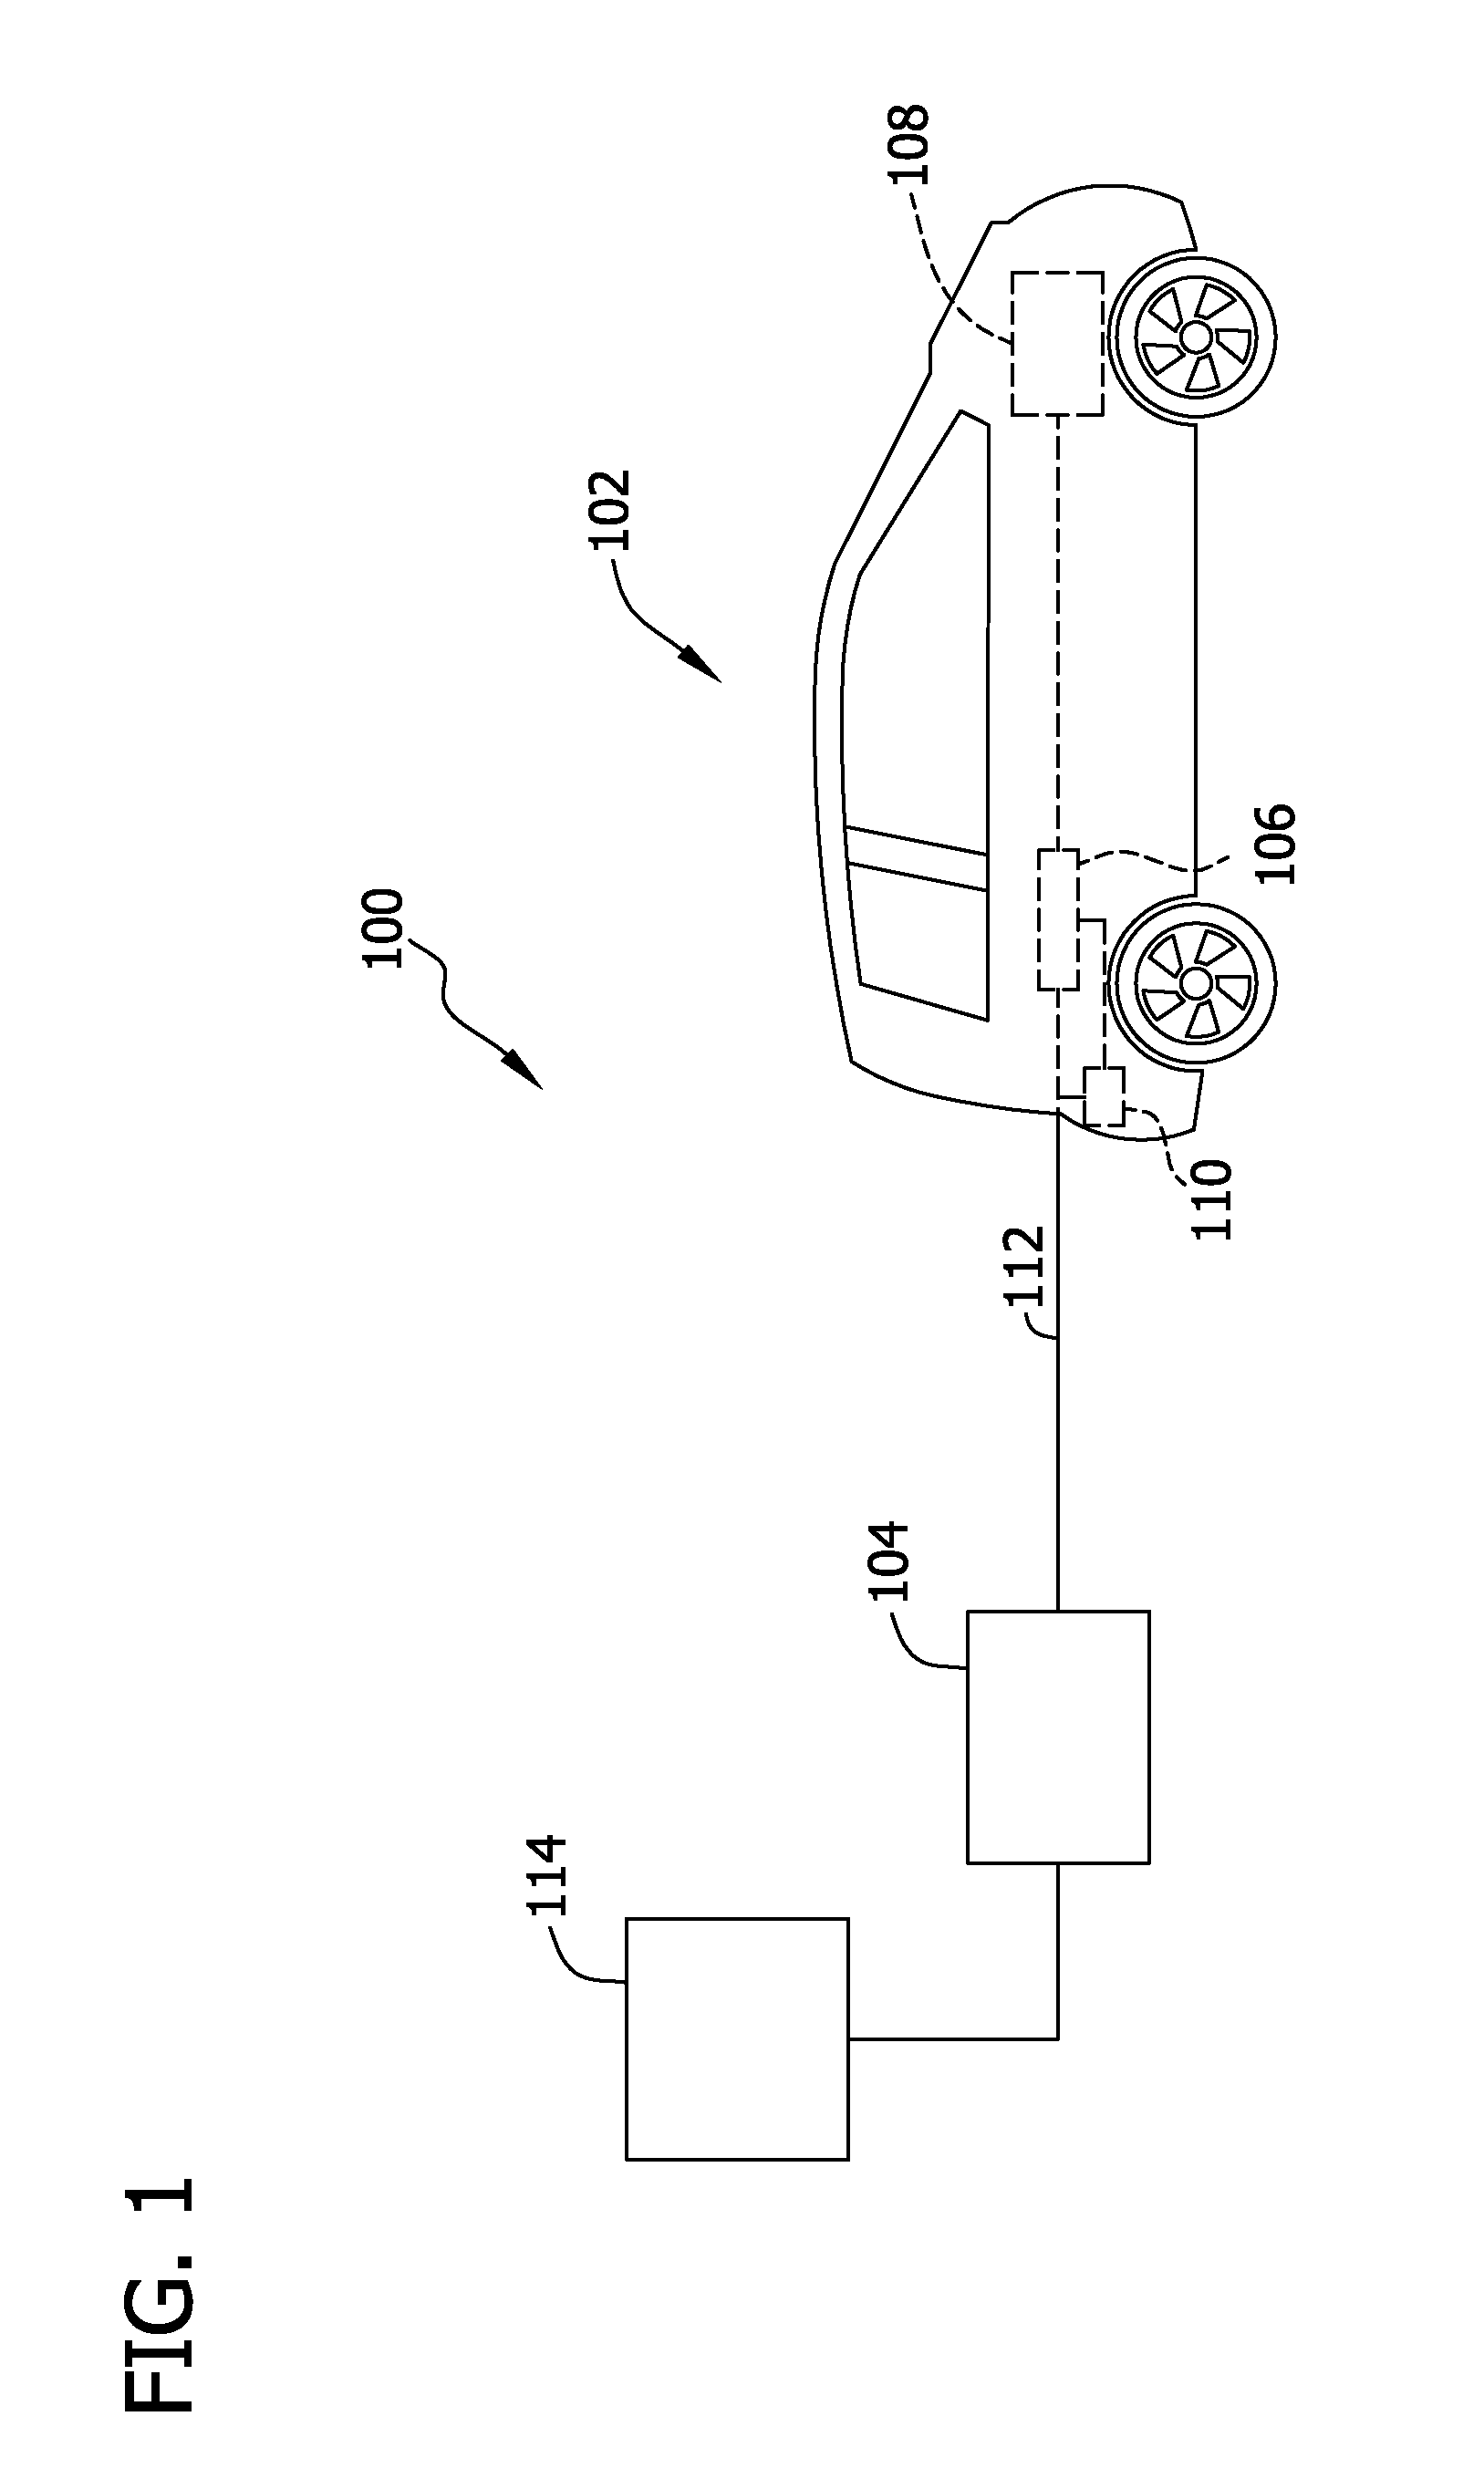 Charging system, kiosk, and method of supplying current to a power storage device